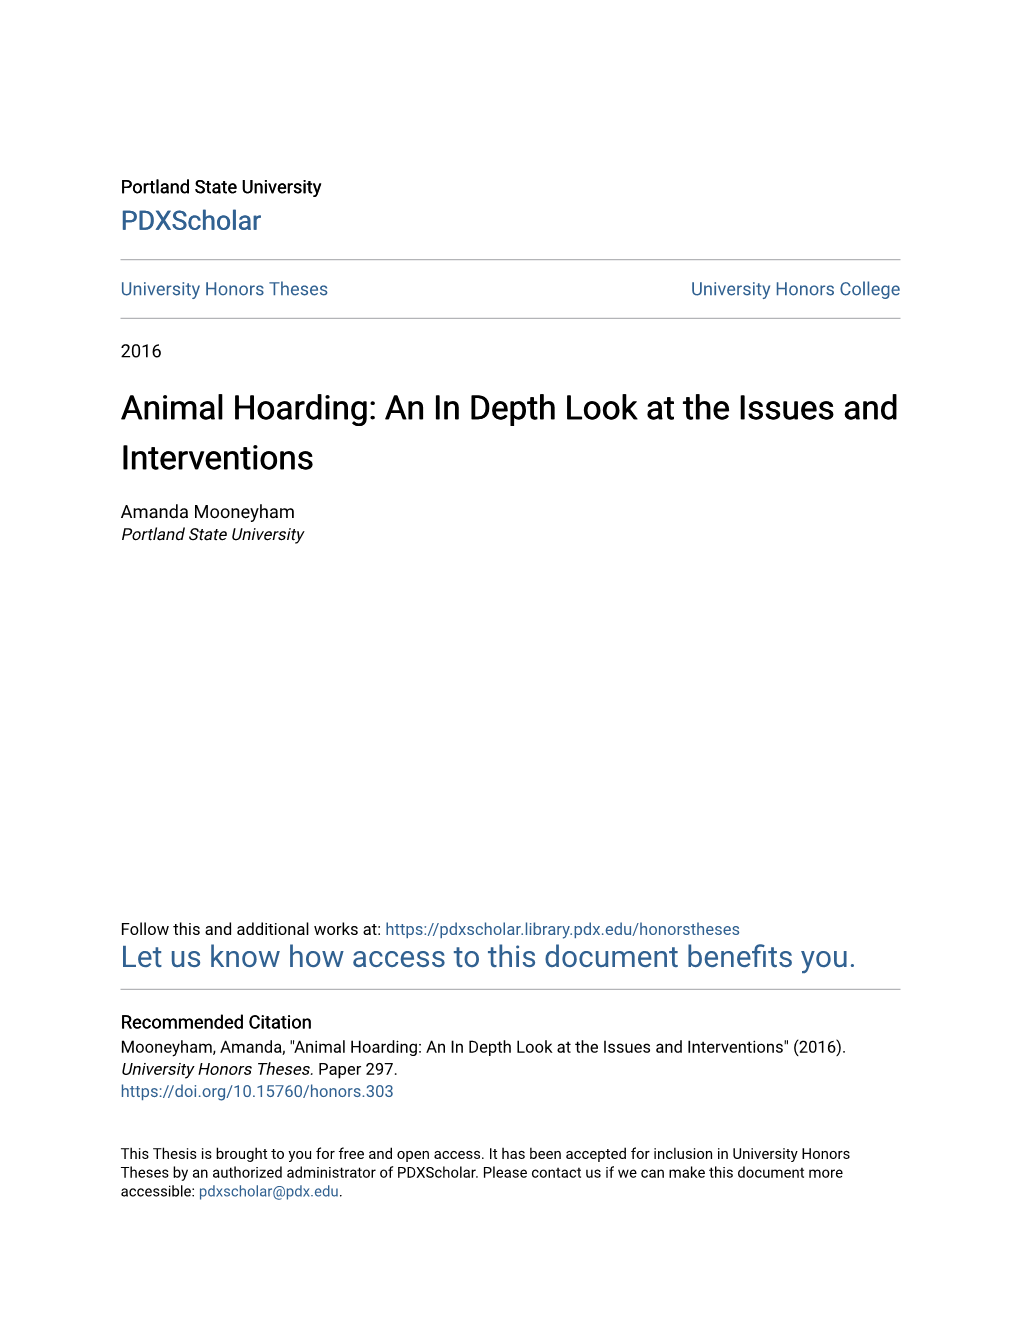 Animal Hoarding: an in Depth Look at the Issues and Interventions